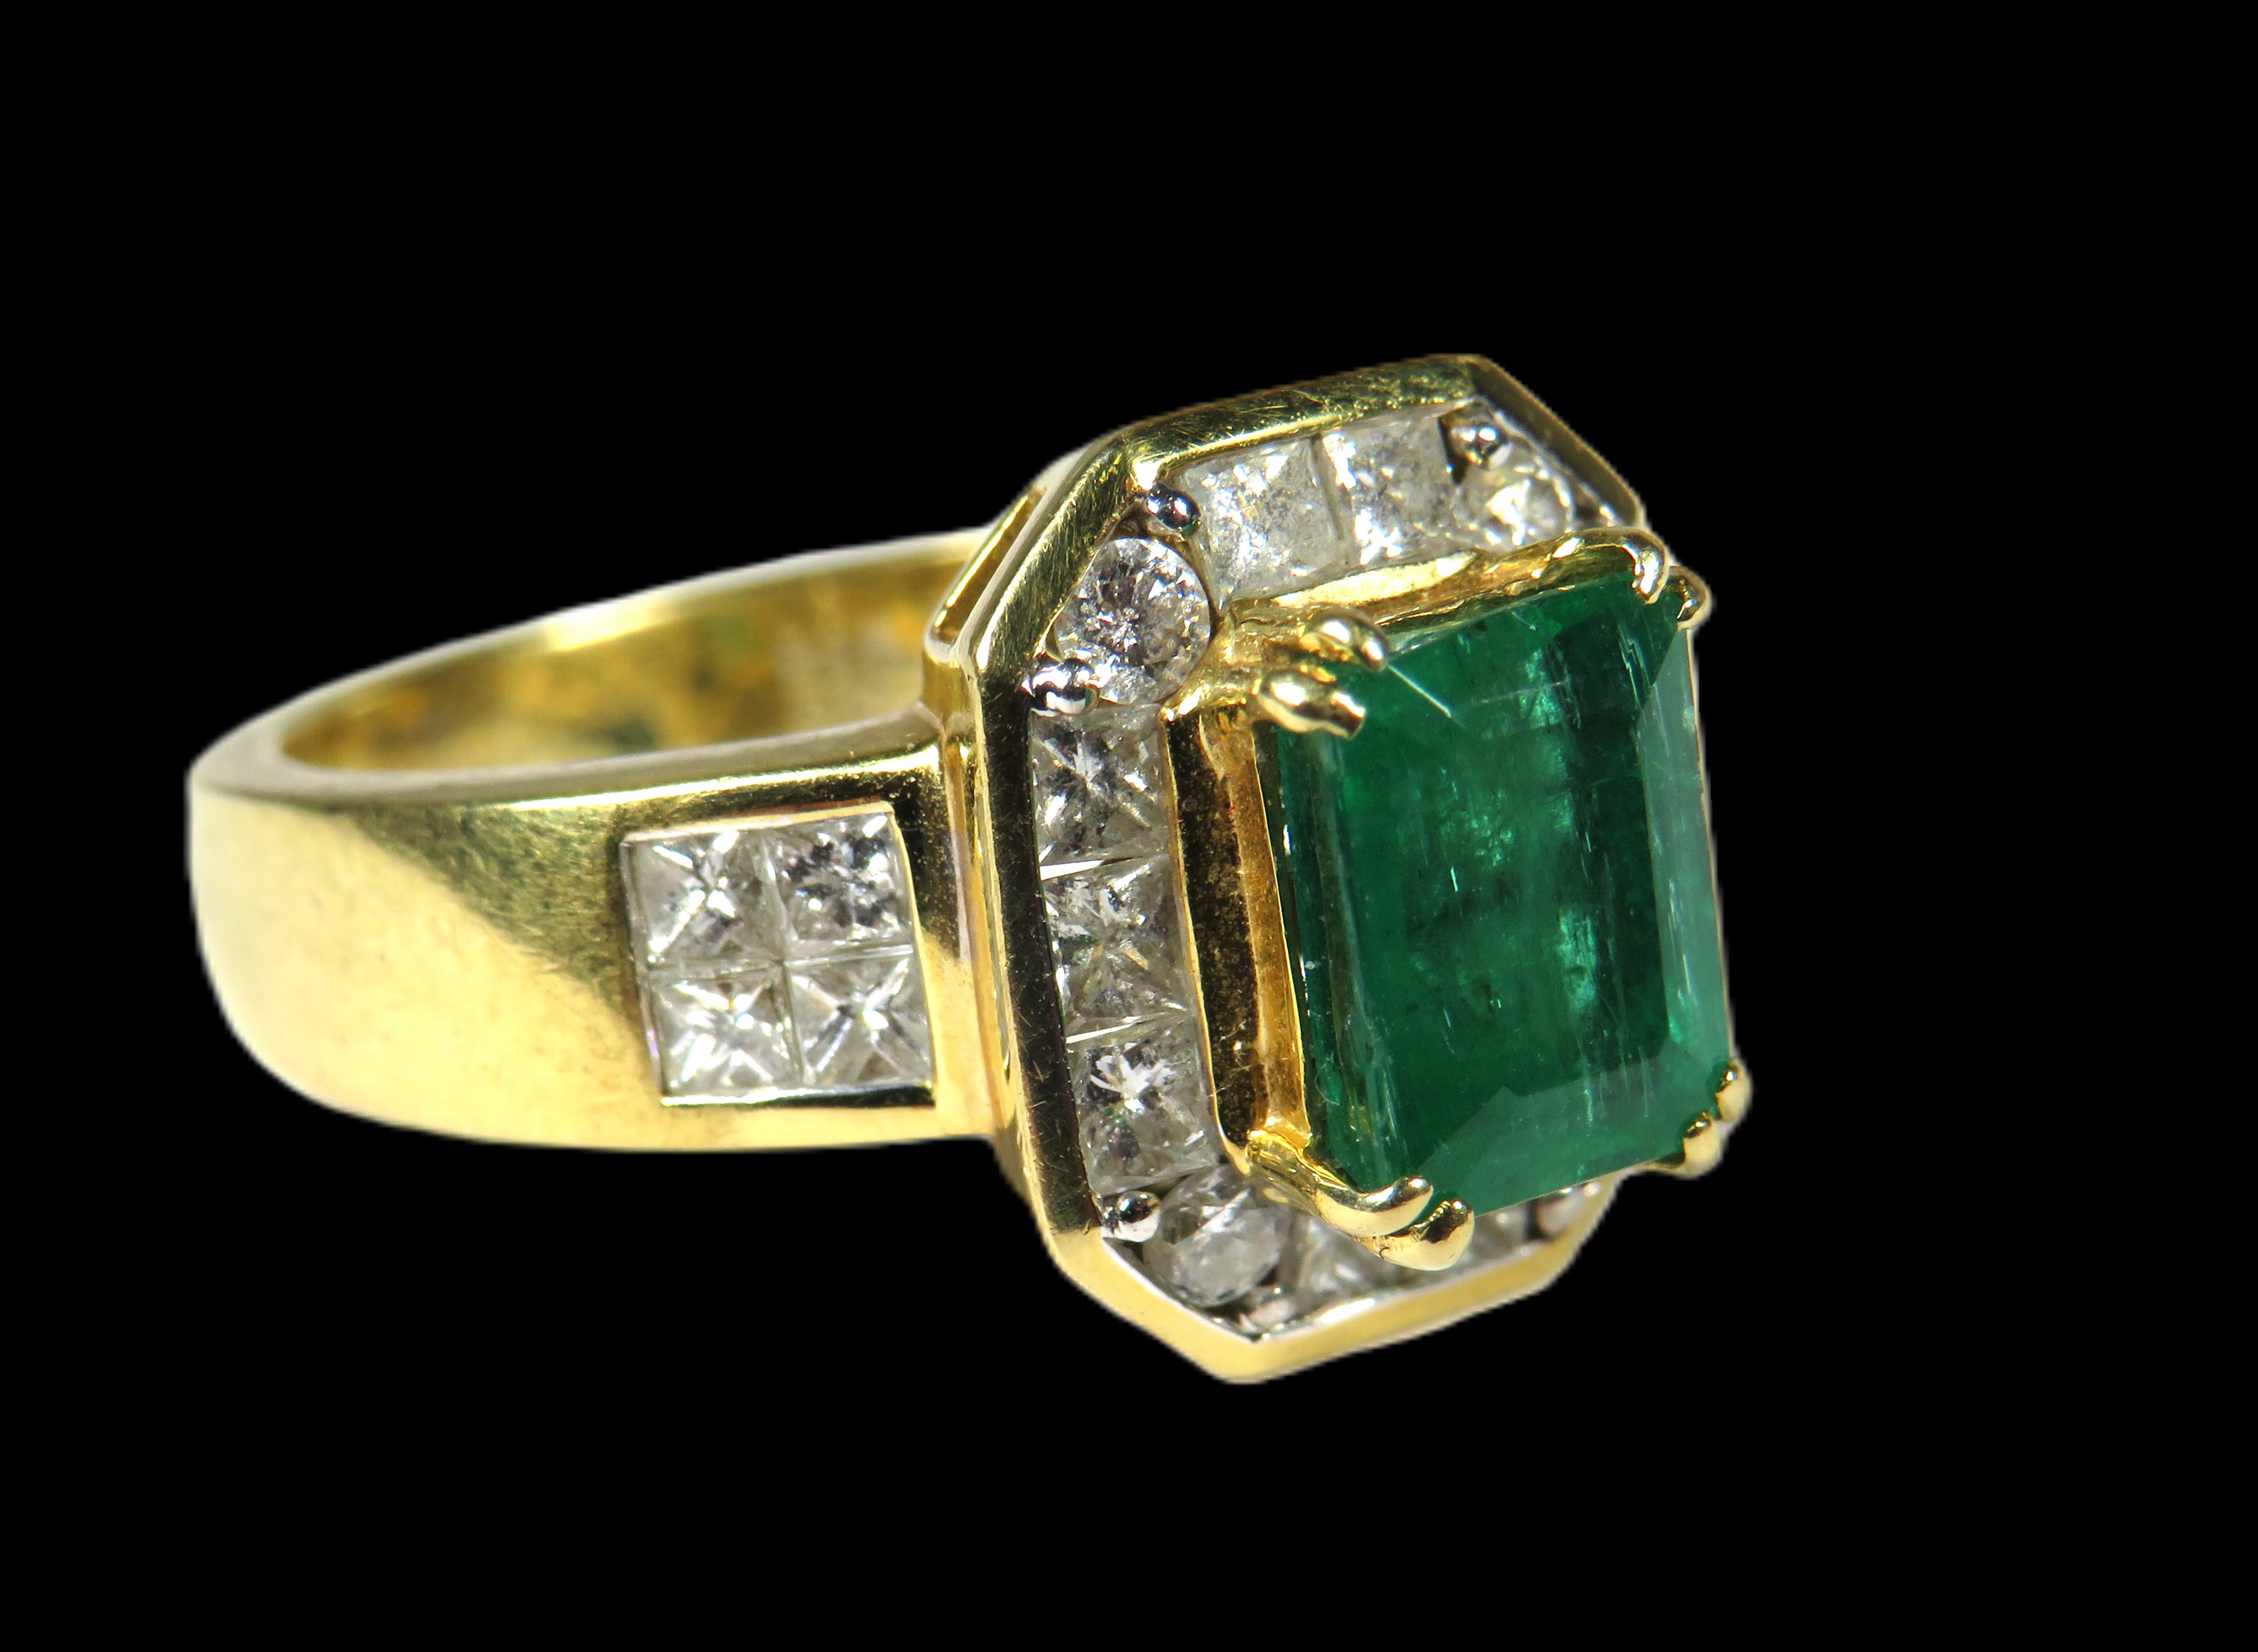 18ct Yellow Gold Art Deco Style Ring set with an amazing Central Emerald